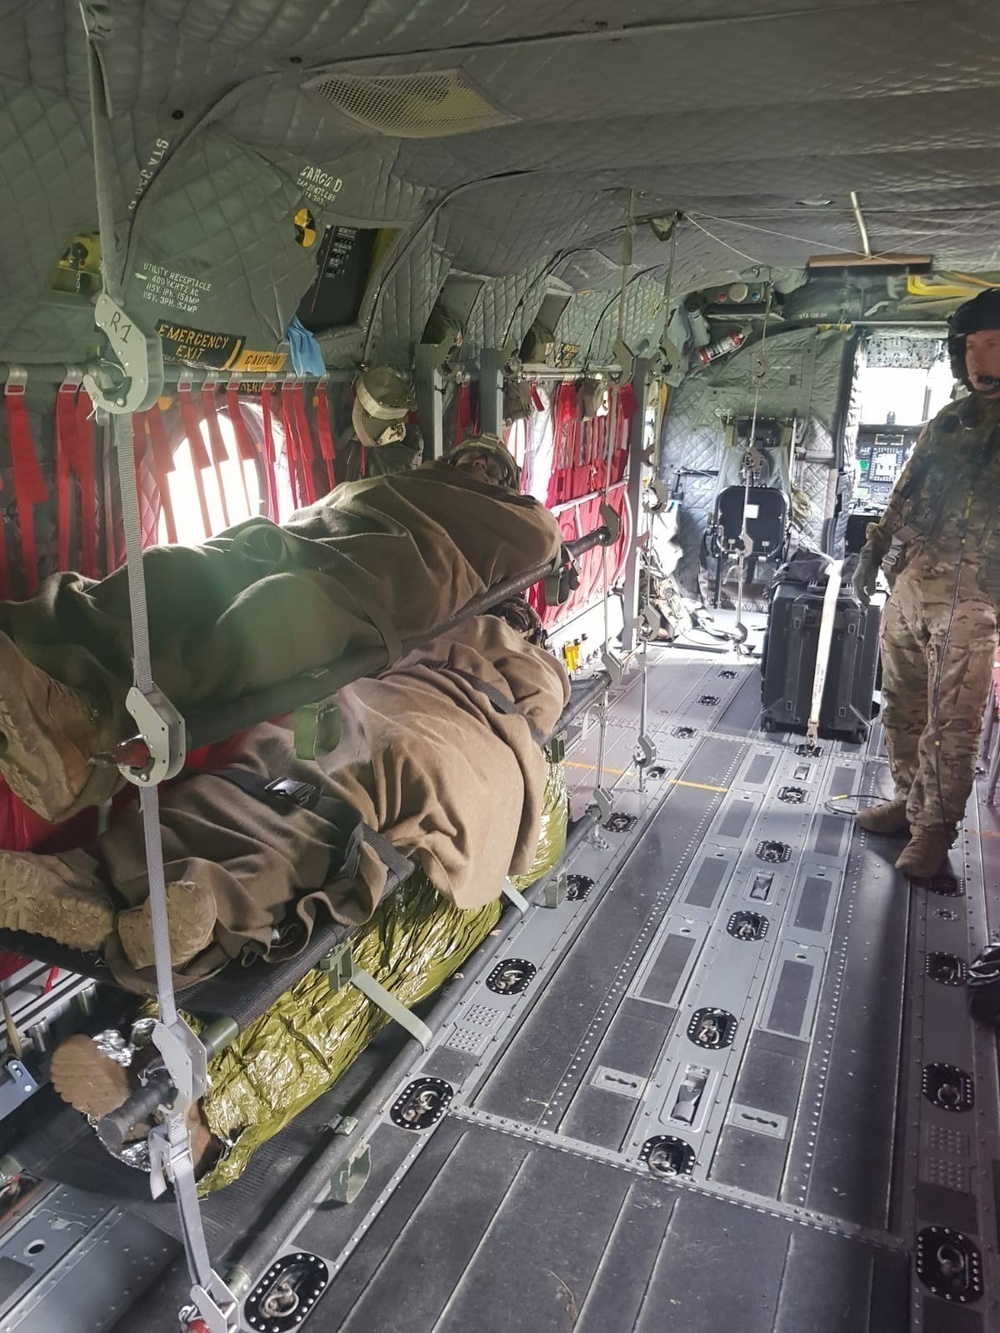 A Soldier’s Story: RES, 2CR trains CASEVAC with CH-47 Chinook